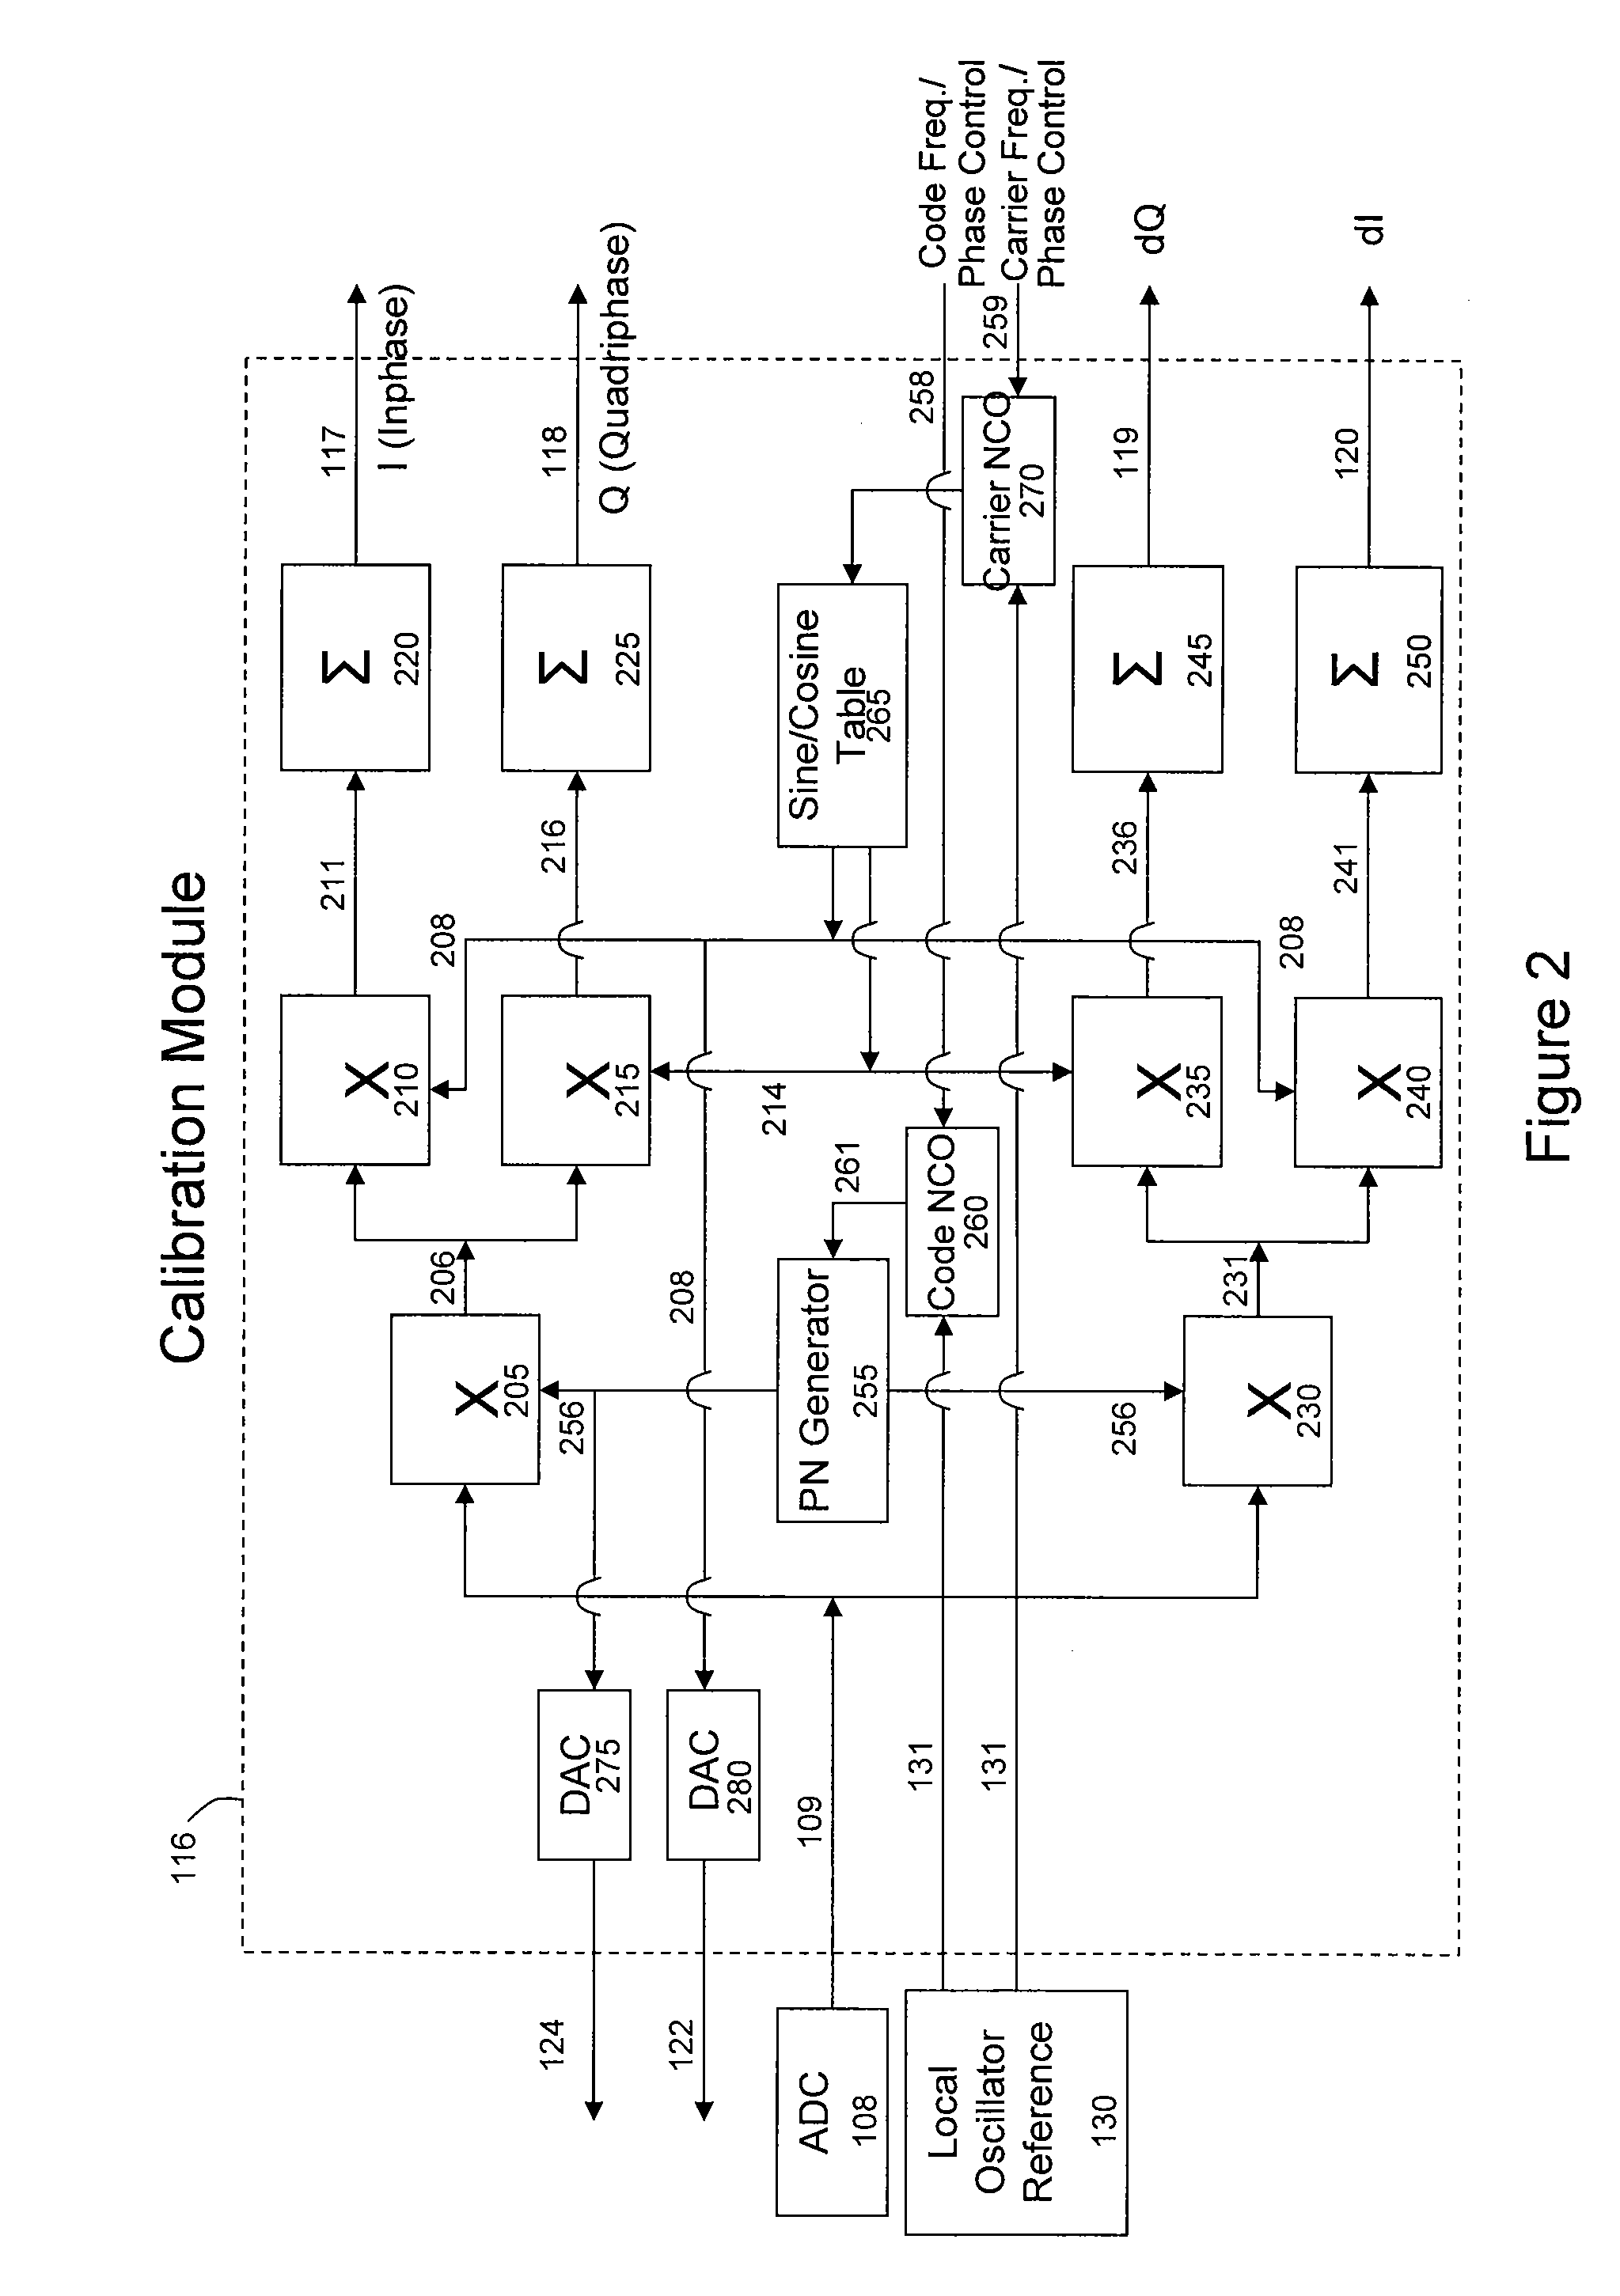 Inter-channel bias calibration for navigation satellite systems